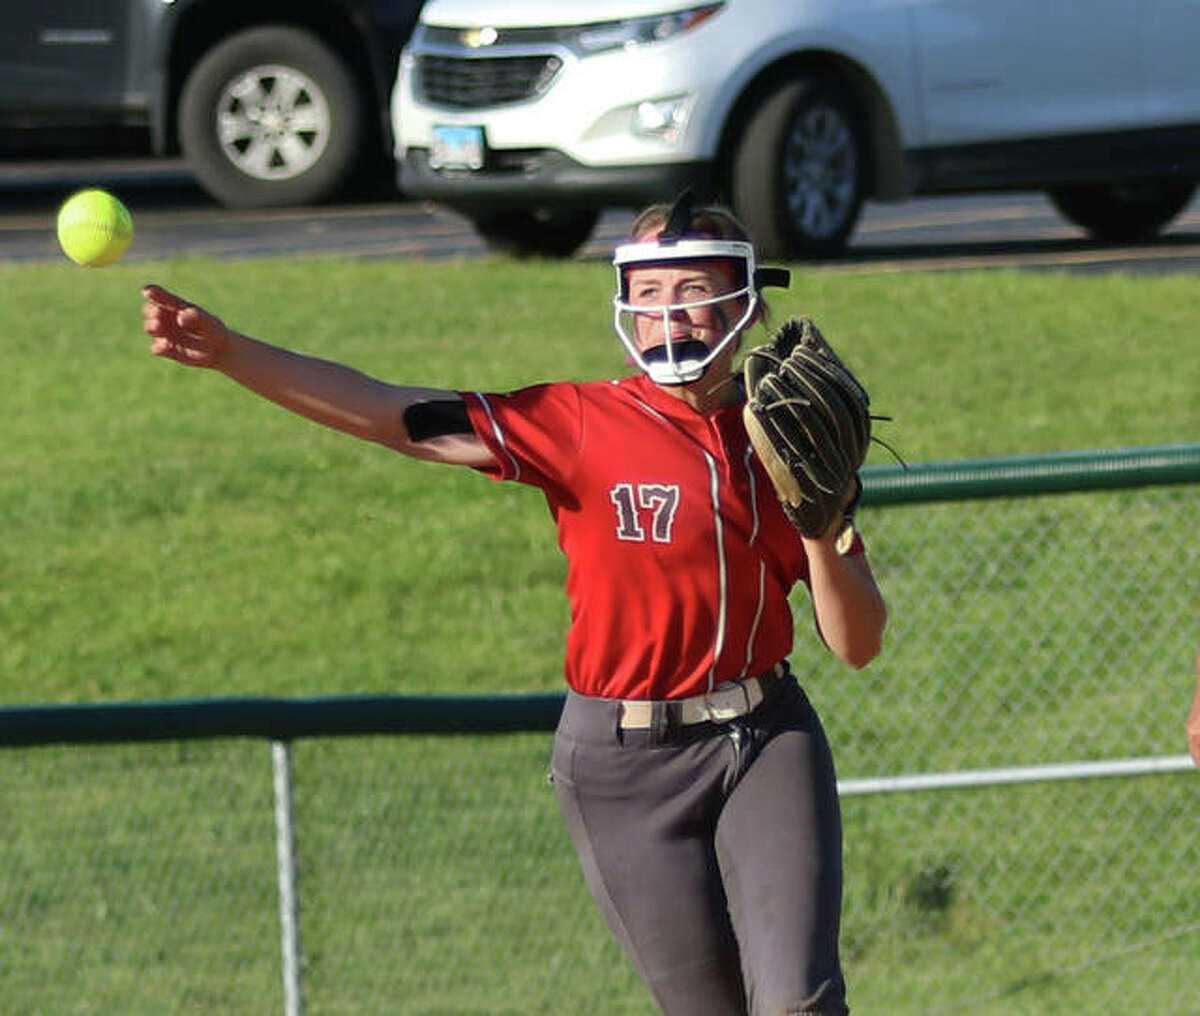 Alton shortstop Alissa Sauls throws to first for an out in a game earlier this month in Godfrey. The Redbirds were in Collinsville on Tuesday and lost a key SWC game to the Kahoks.